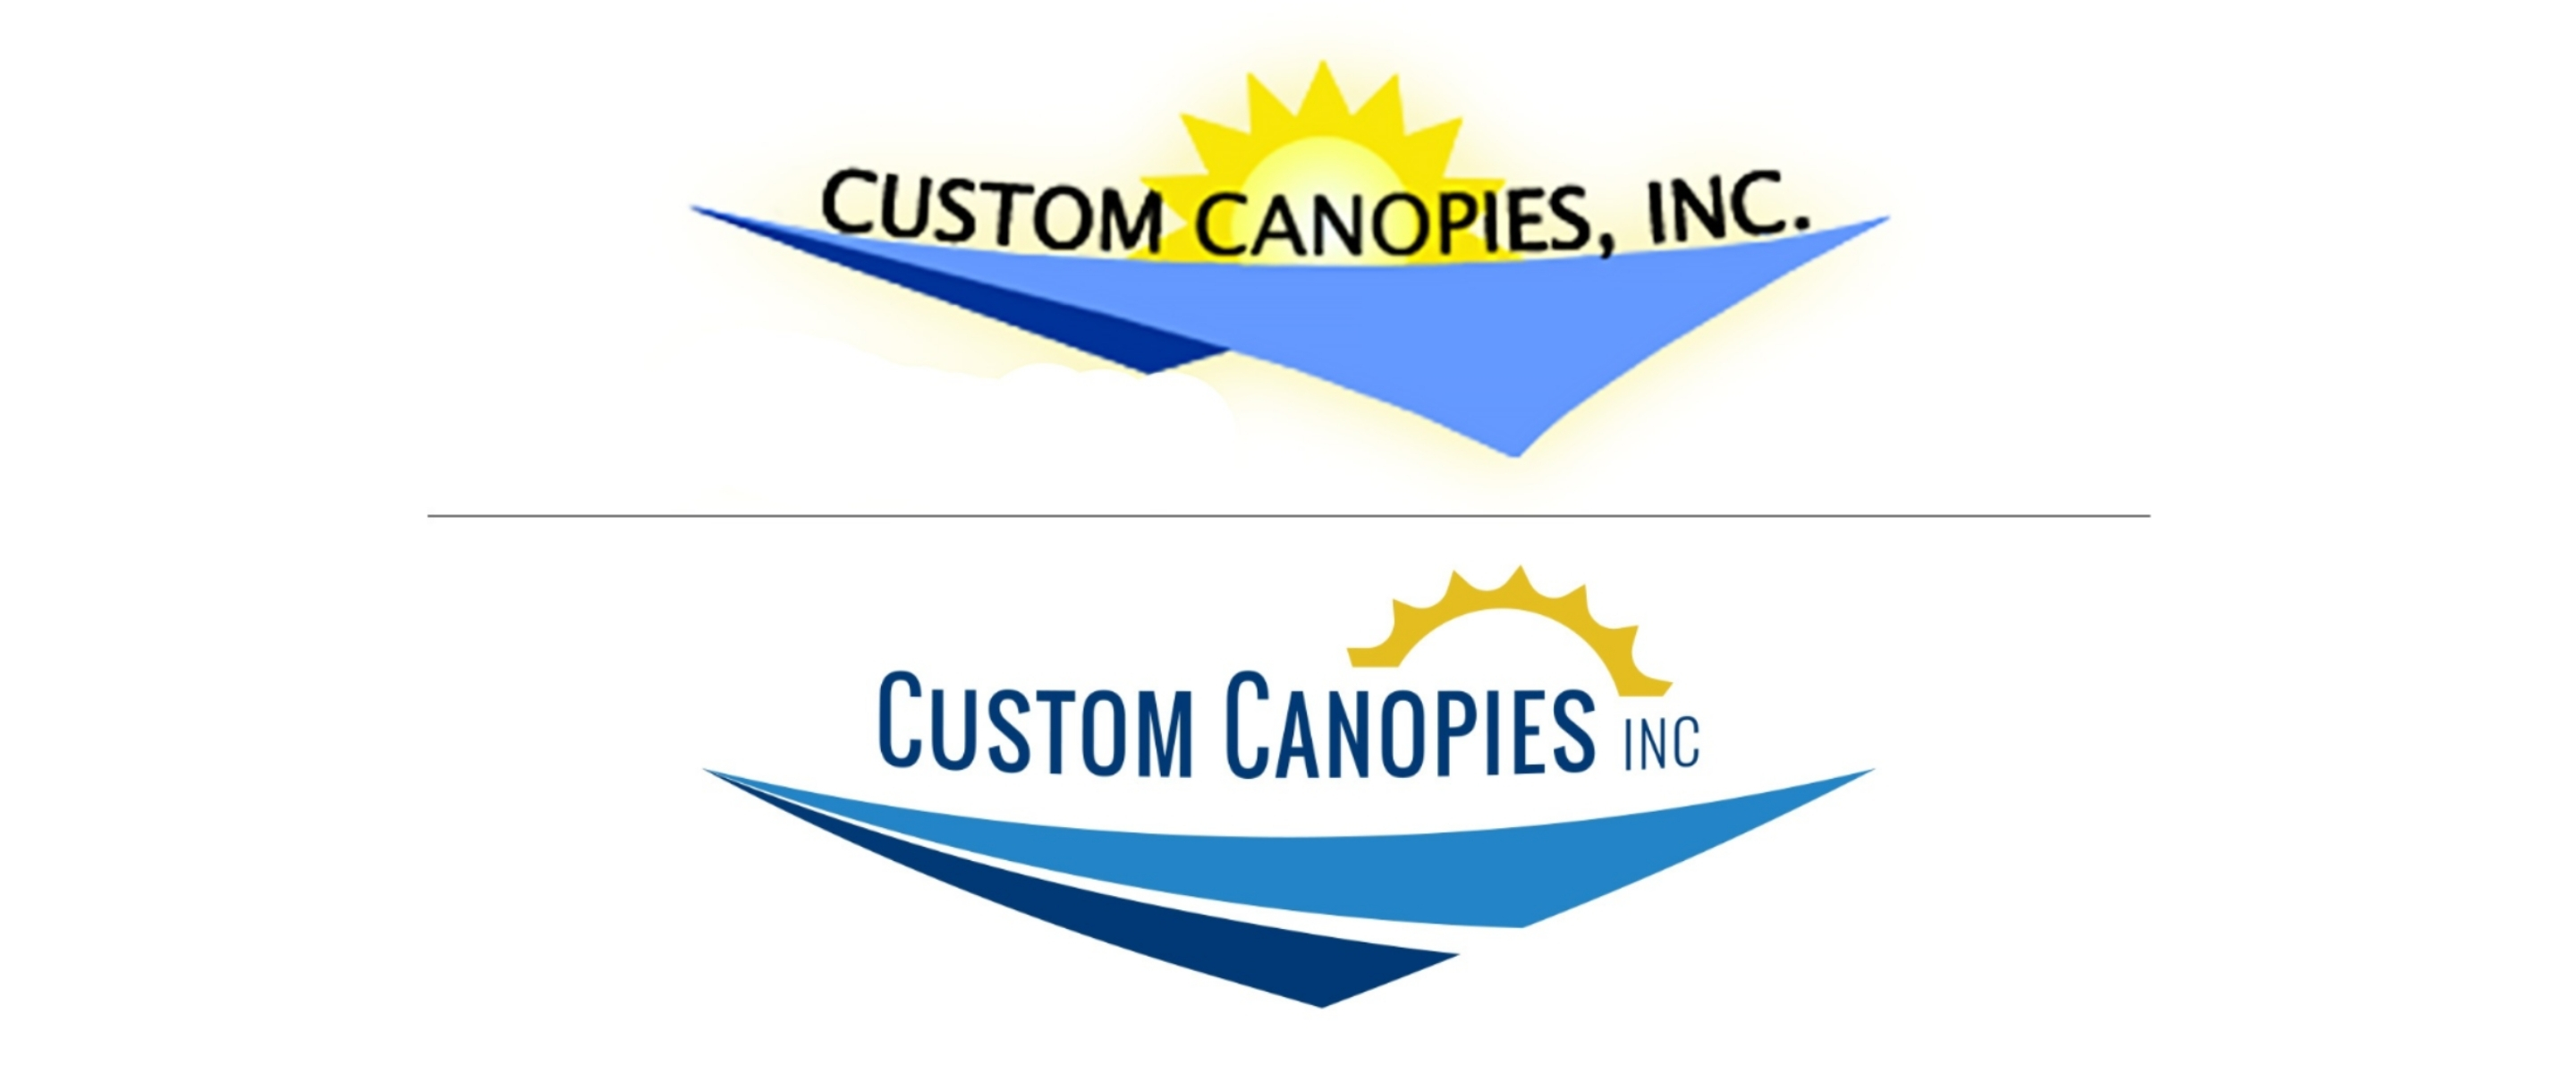 Custom Canopies refreshed their logo for a more modern look